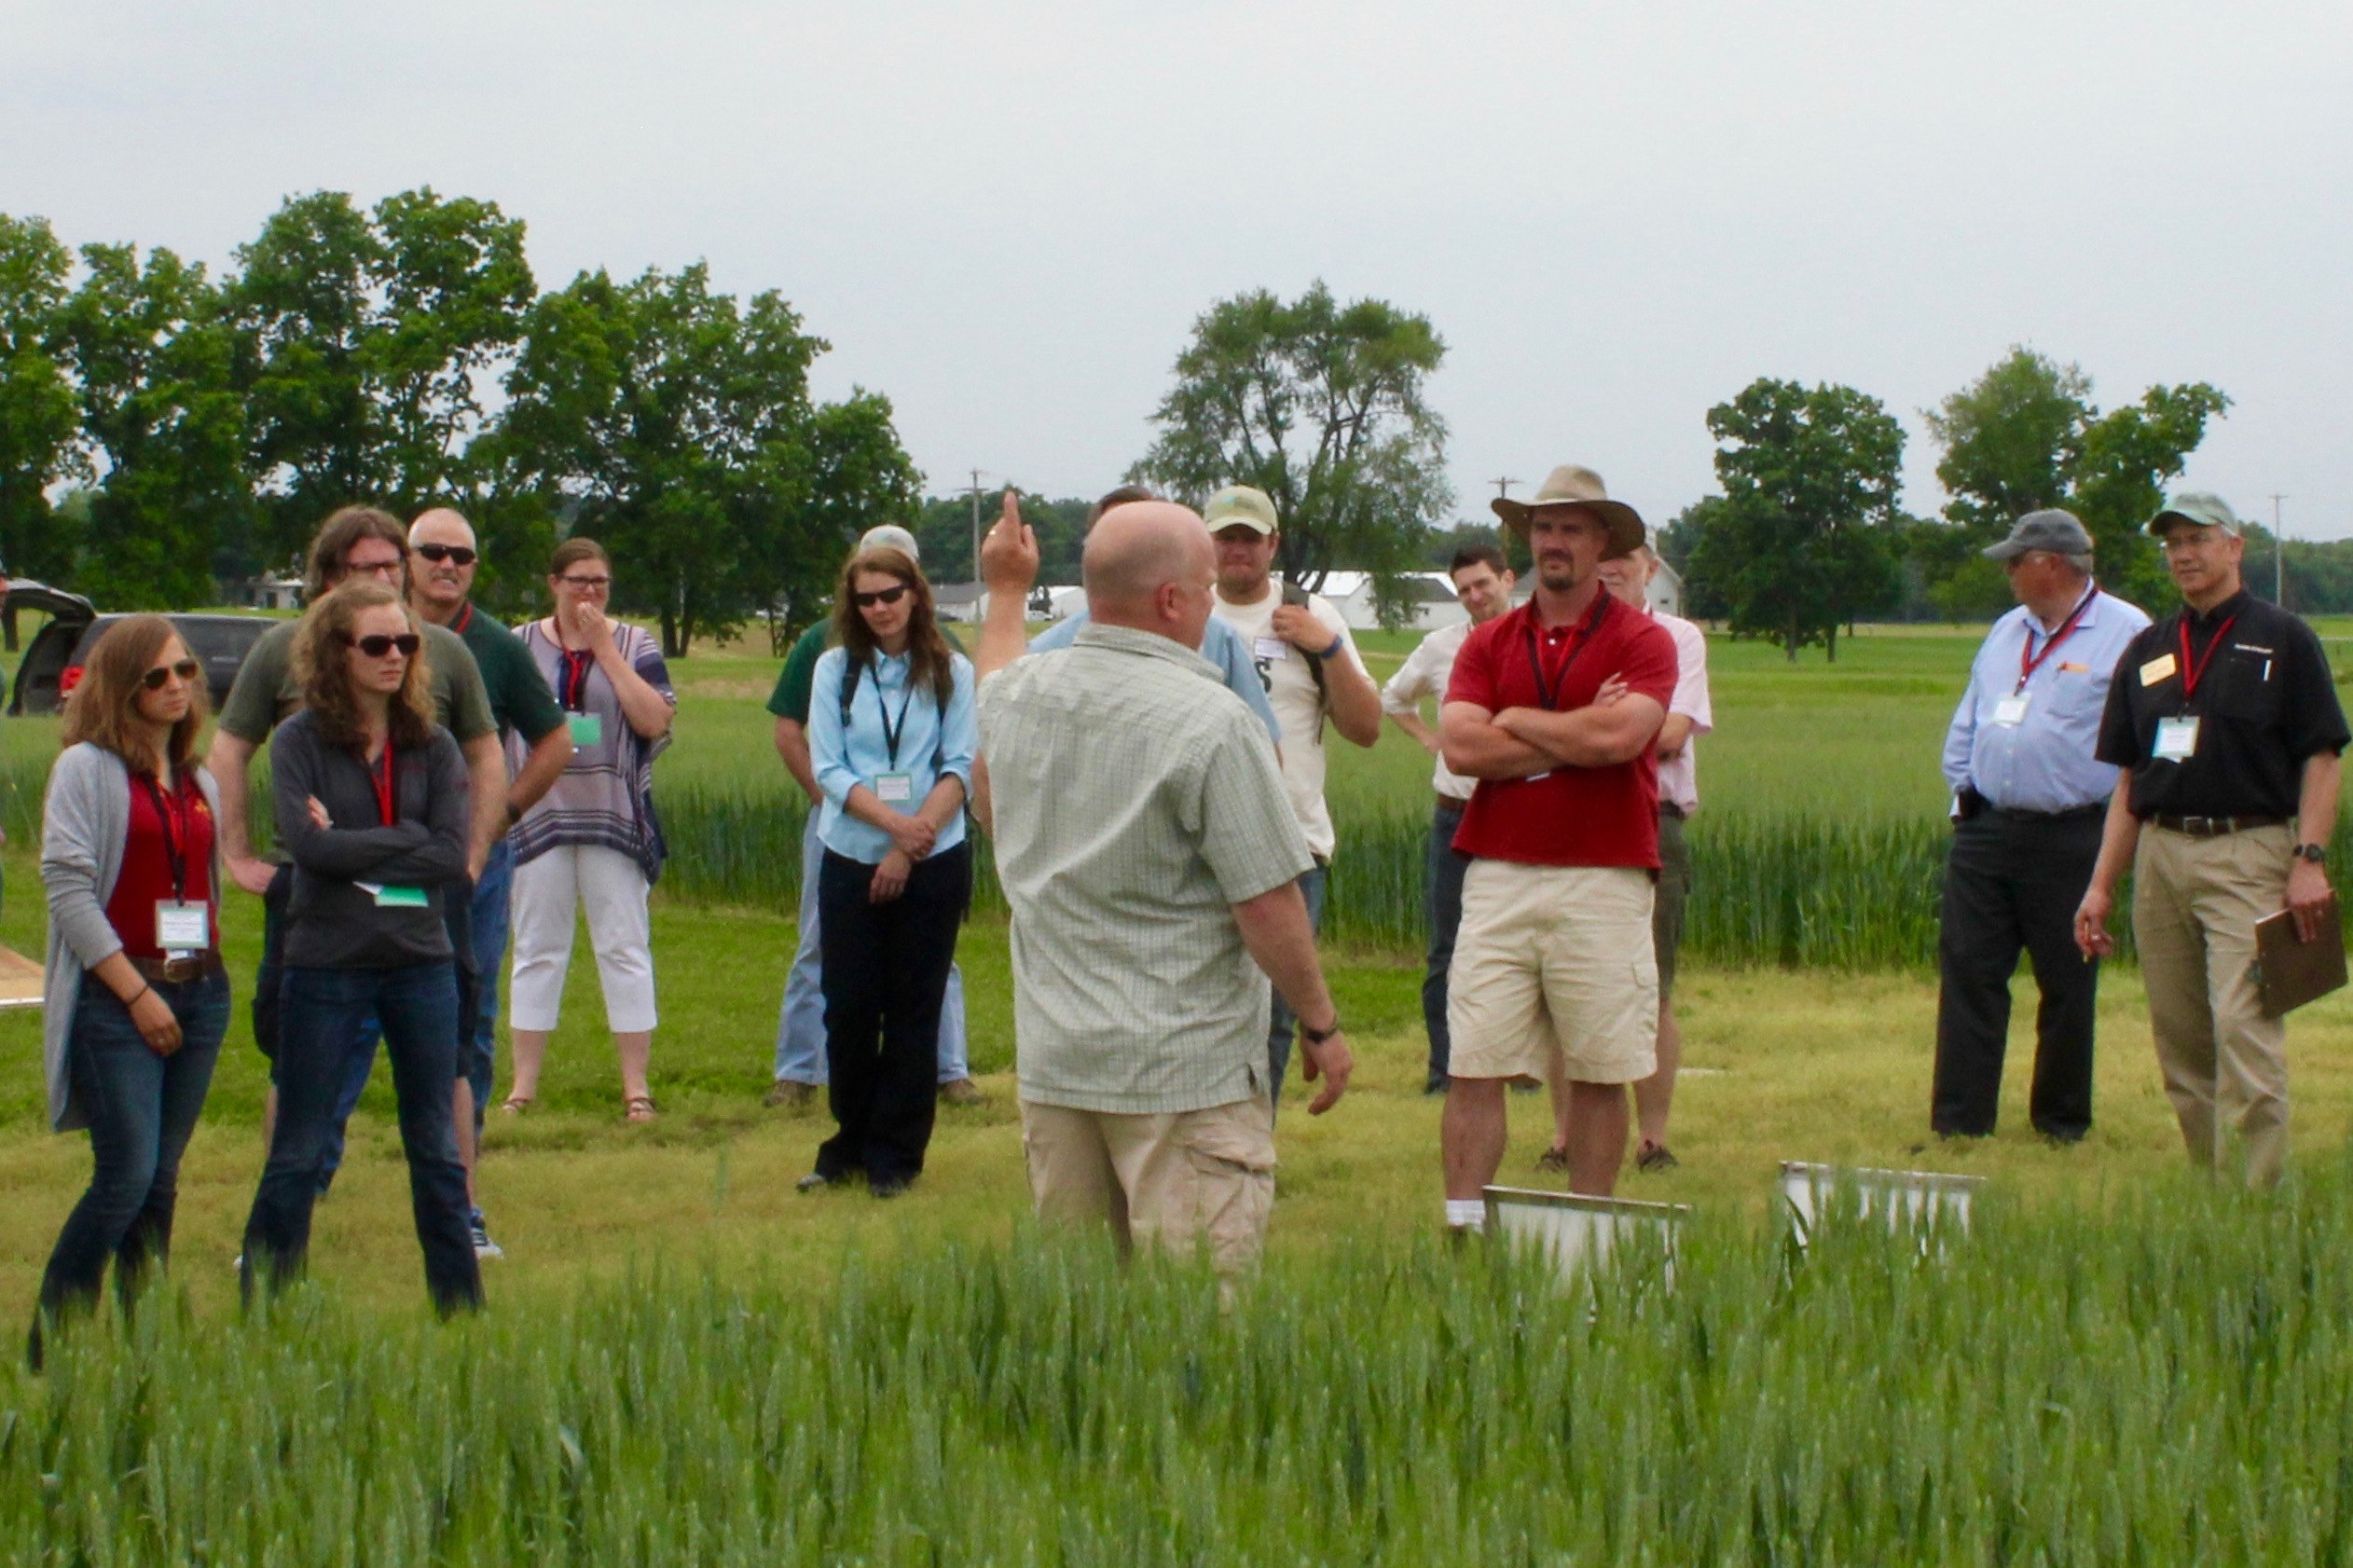 Farmers and agricultural professionals talk with KBS researchers in the field. Photo credit, JE Doll